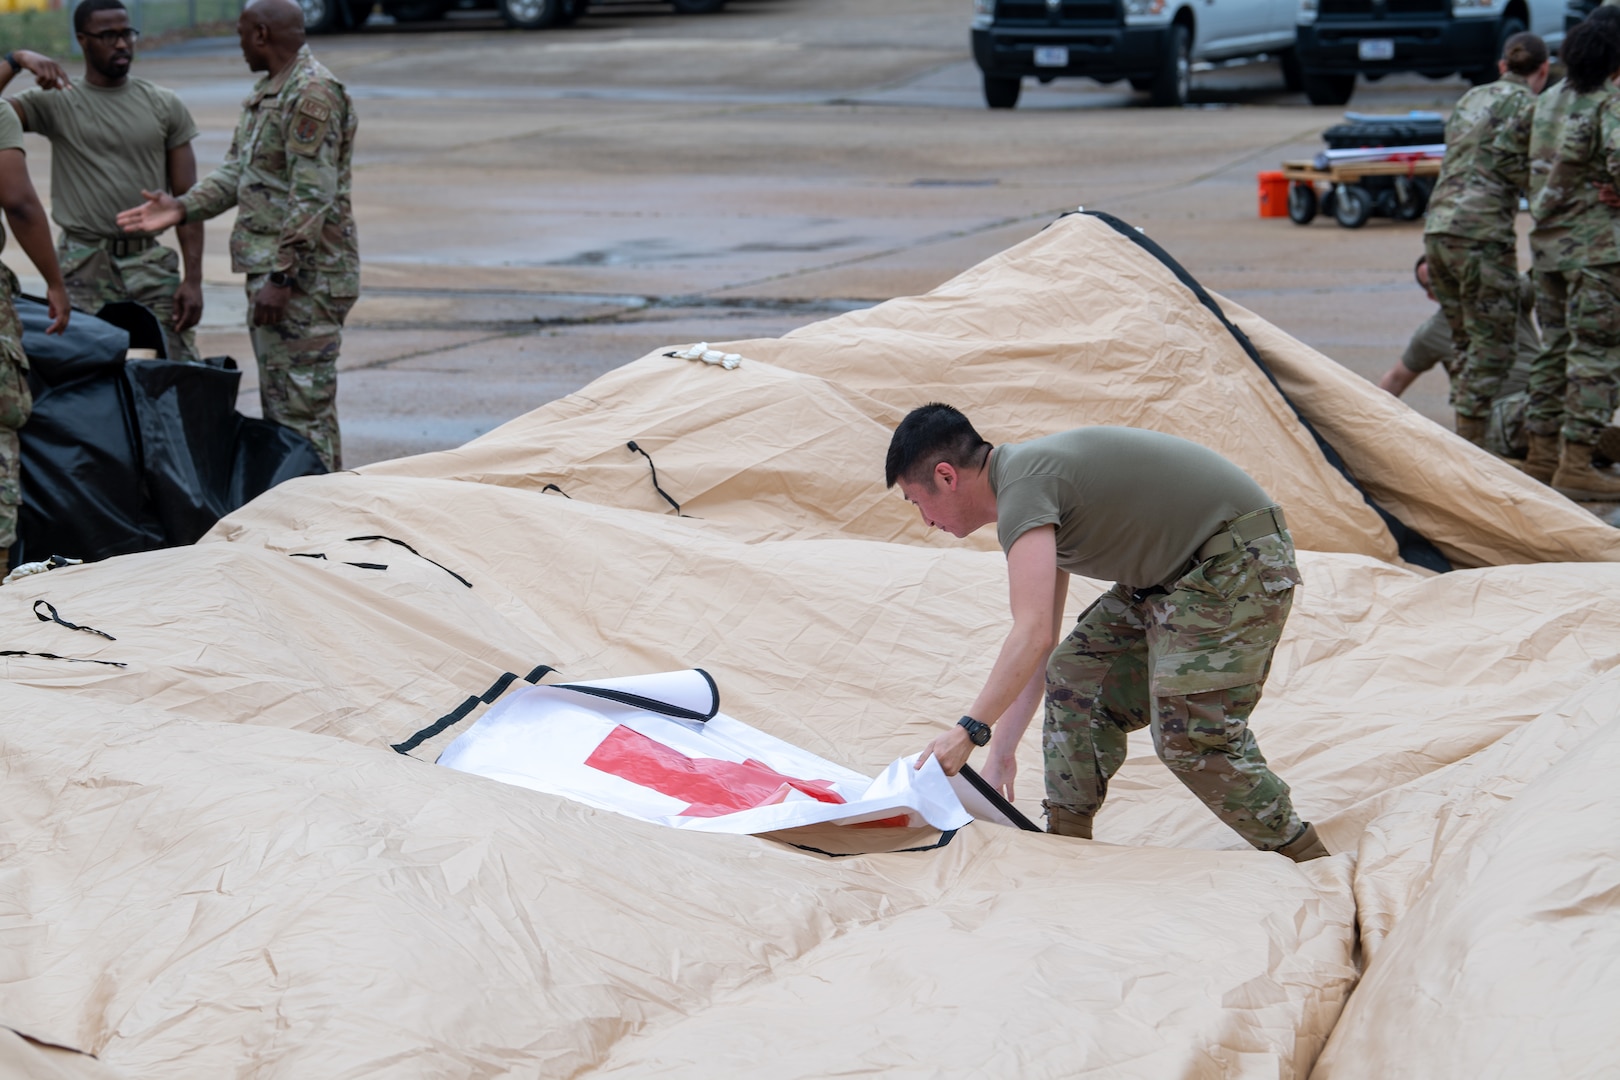 Airman standing on deflated tent fixing healthcare sign